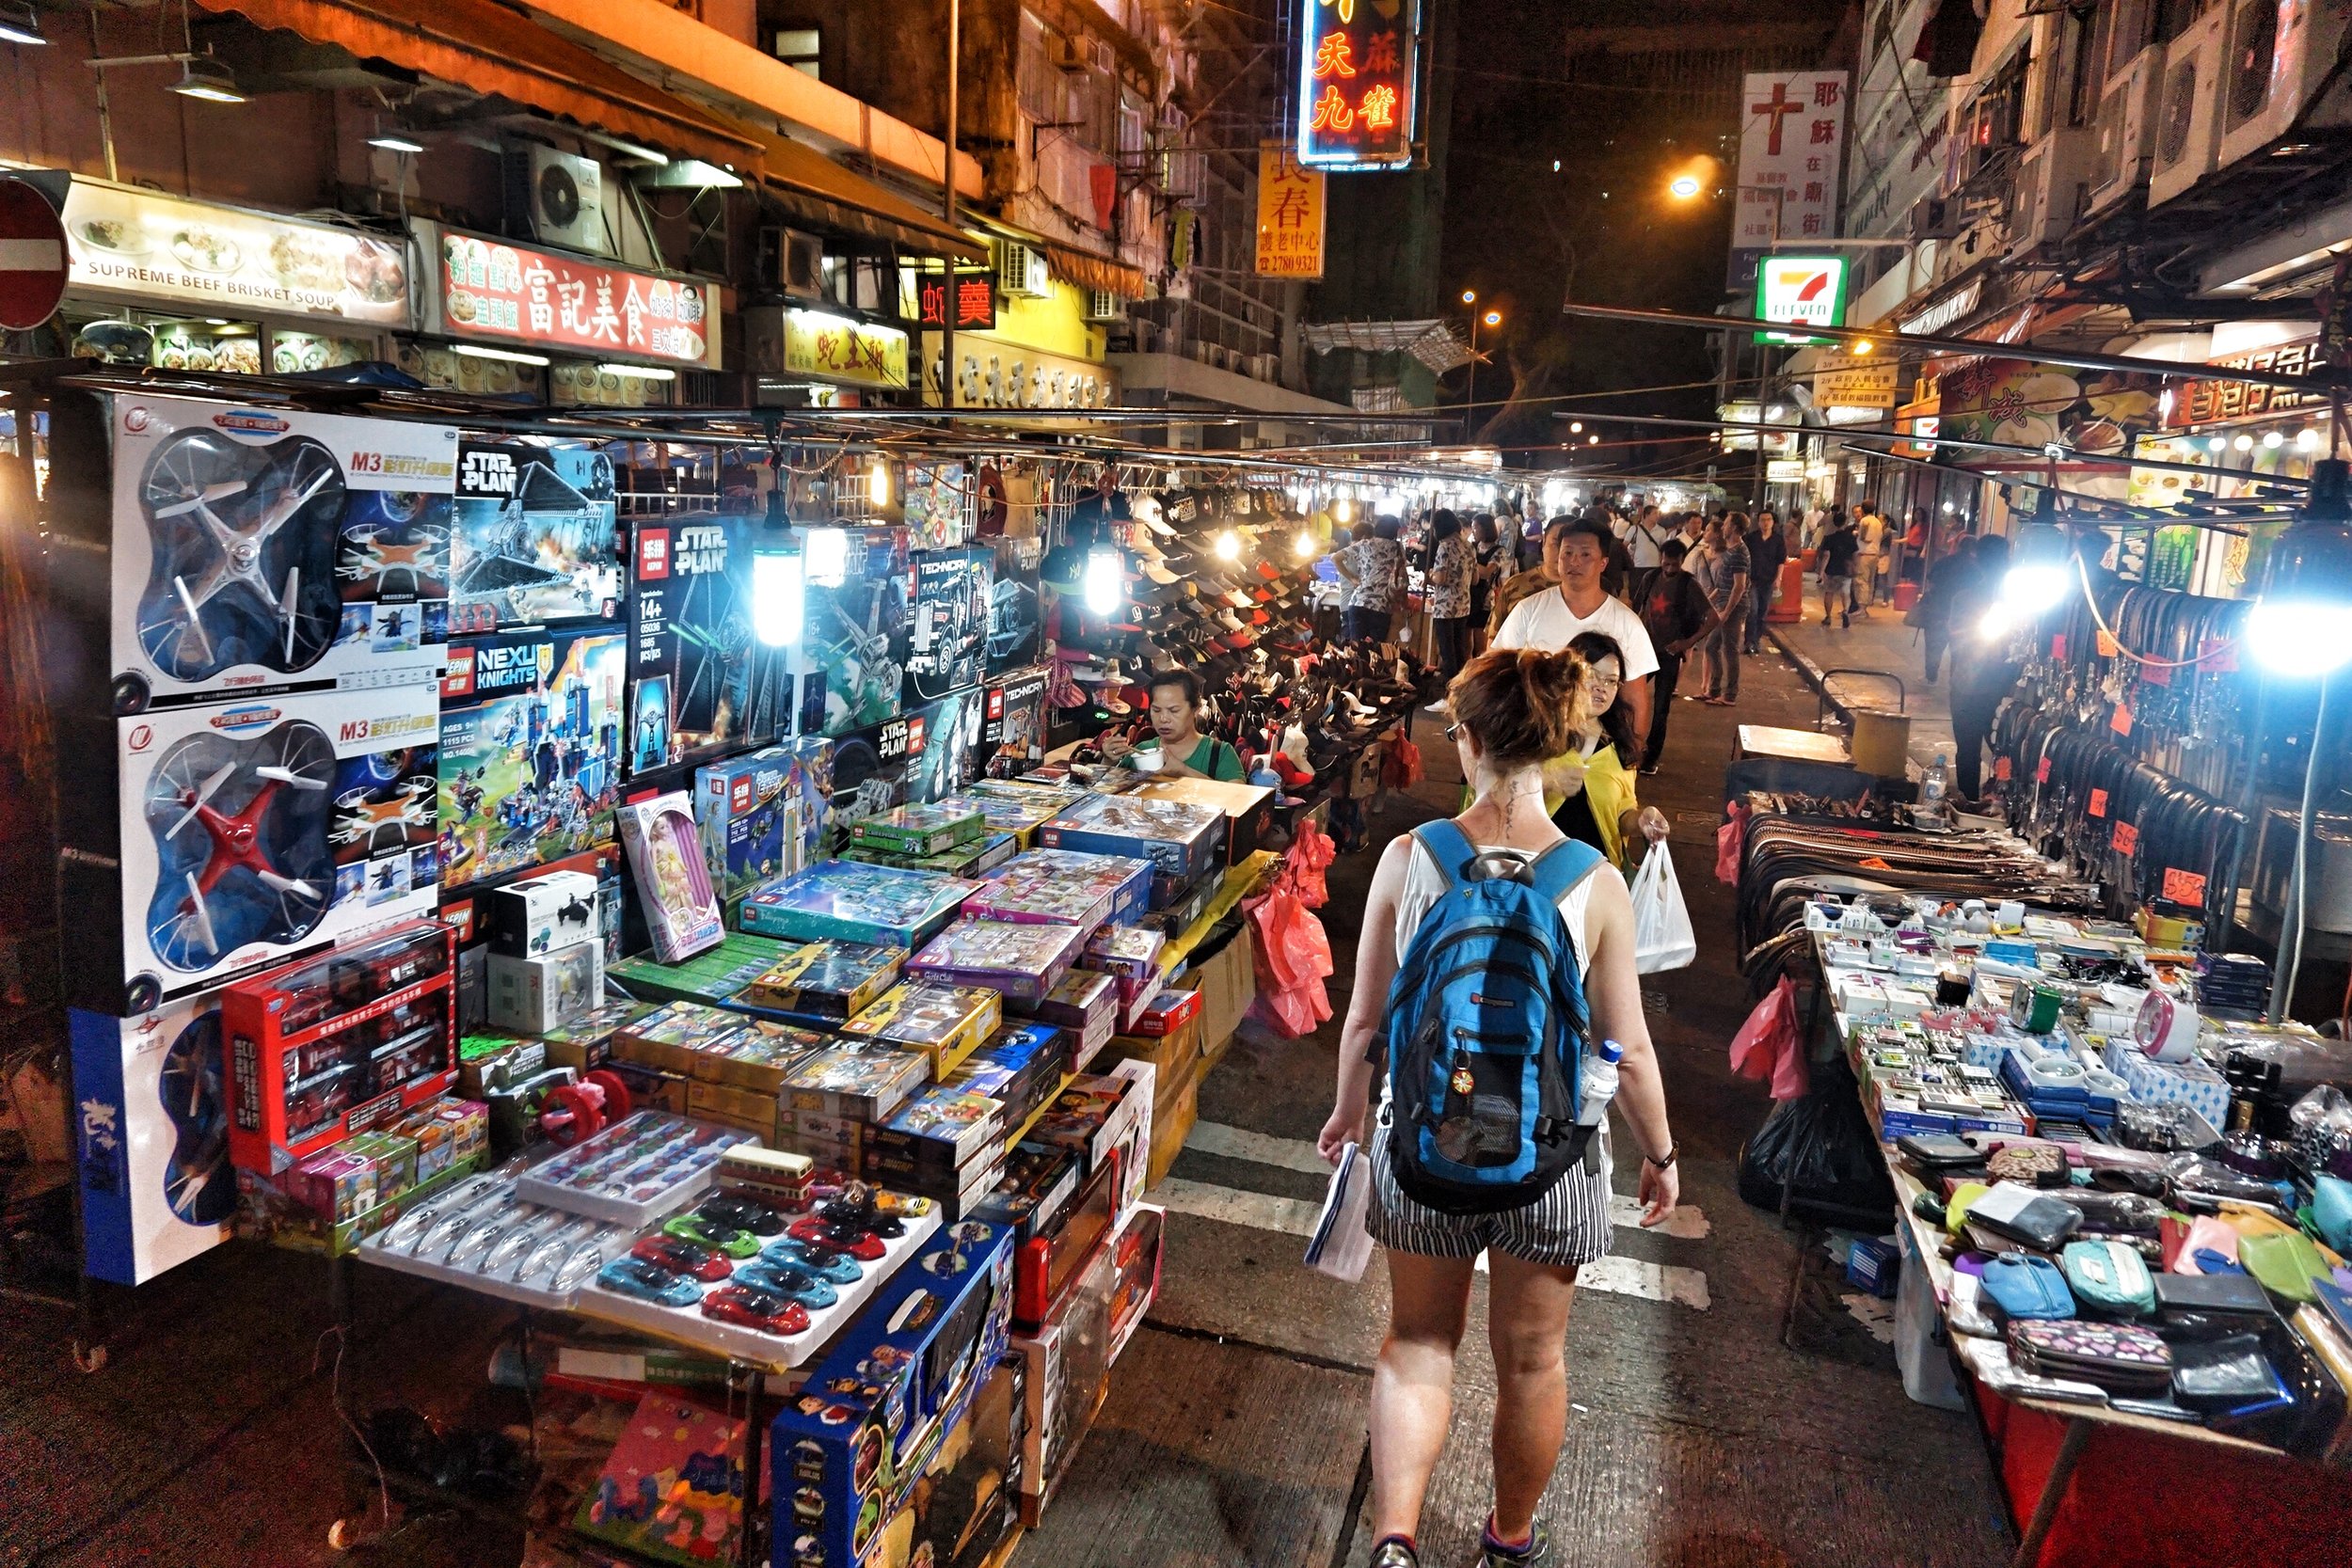 Check out the markets on your night tour Hong Kong